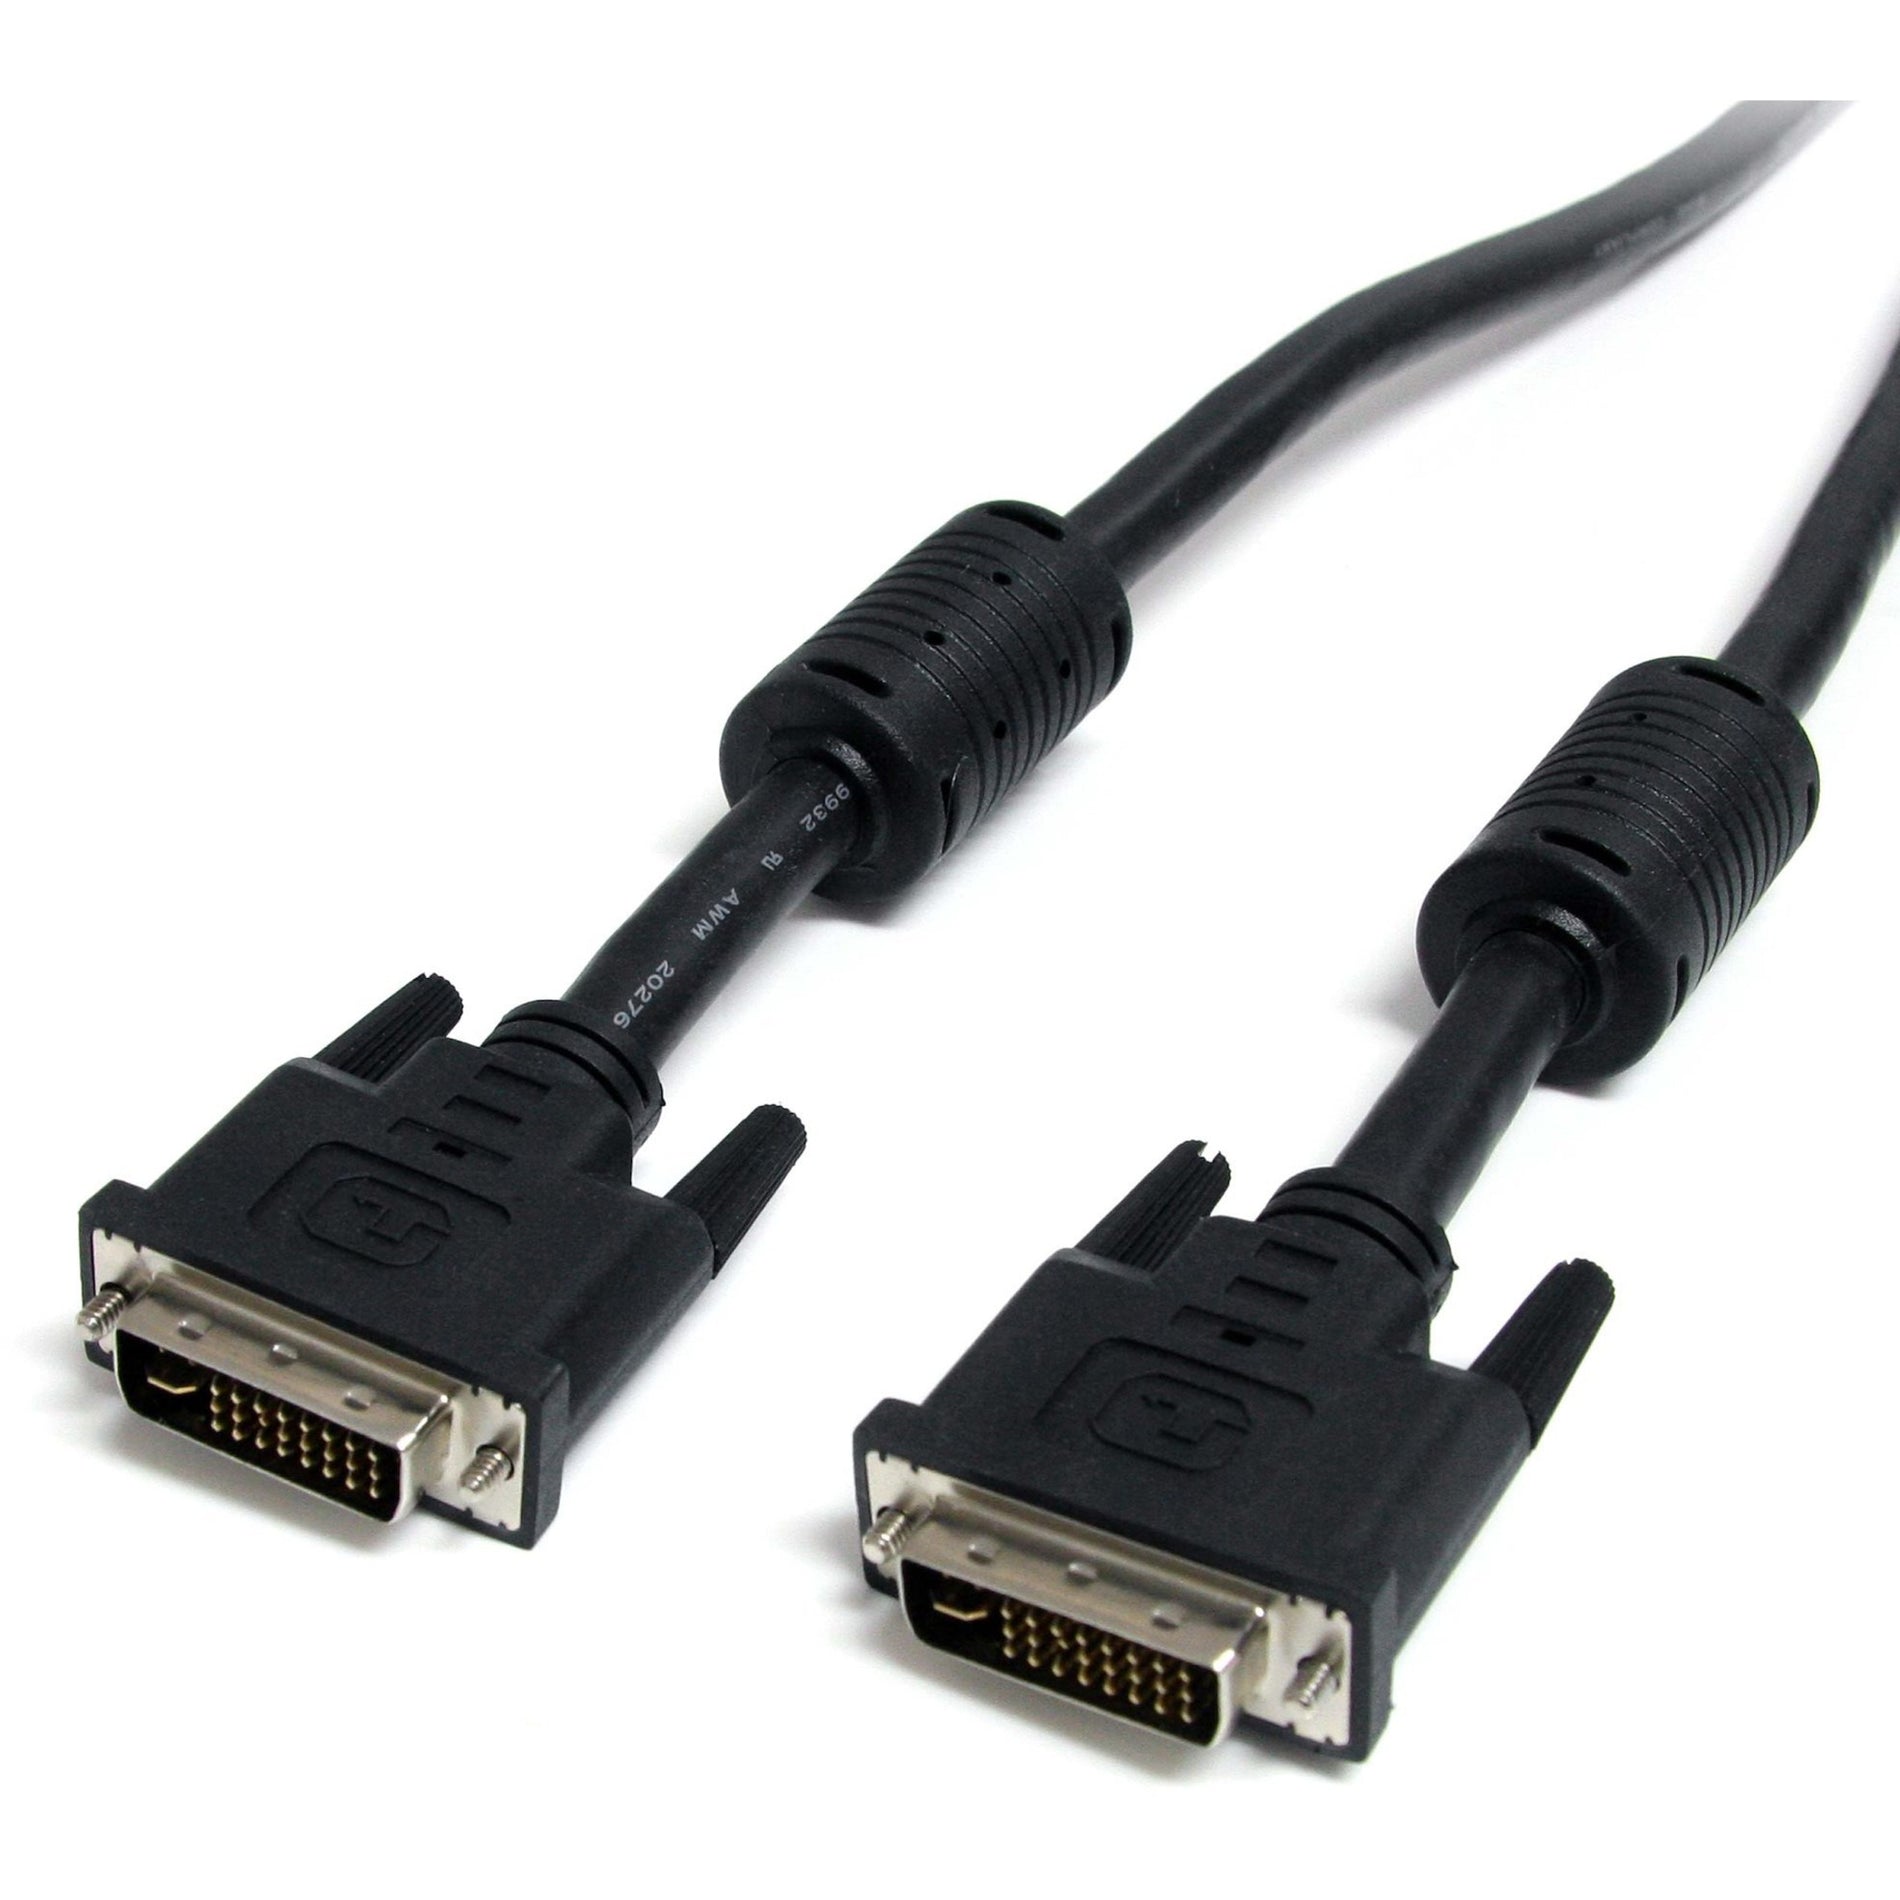 StarTech.com DVIIDMM10 10ft DVI-I Dual Link Monitor Cable - M/M, High-Speed Video Cable for Desktop Computer, Notebook, Monitor, Projector